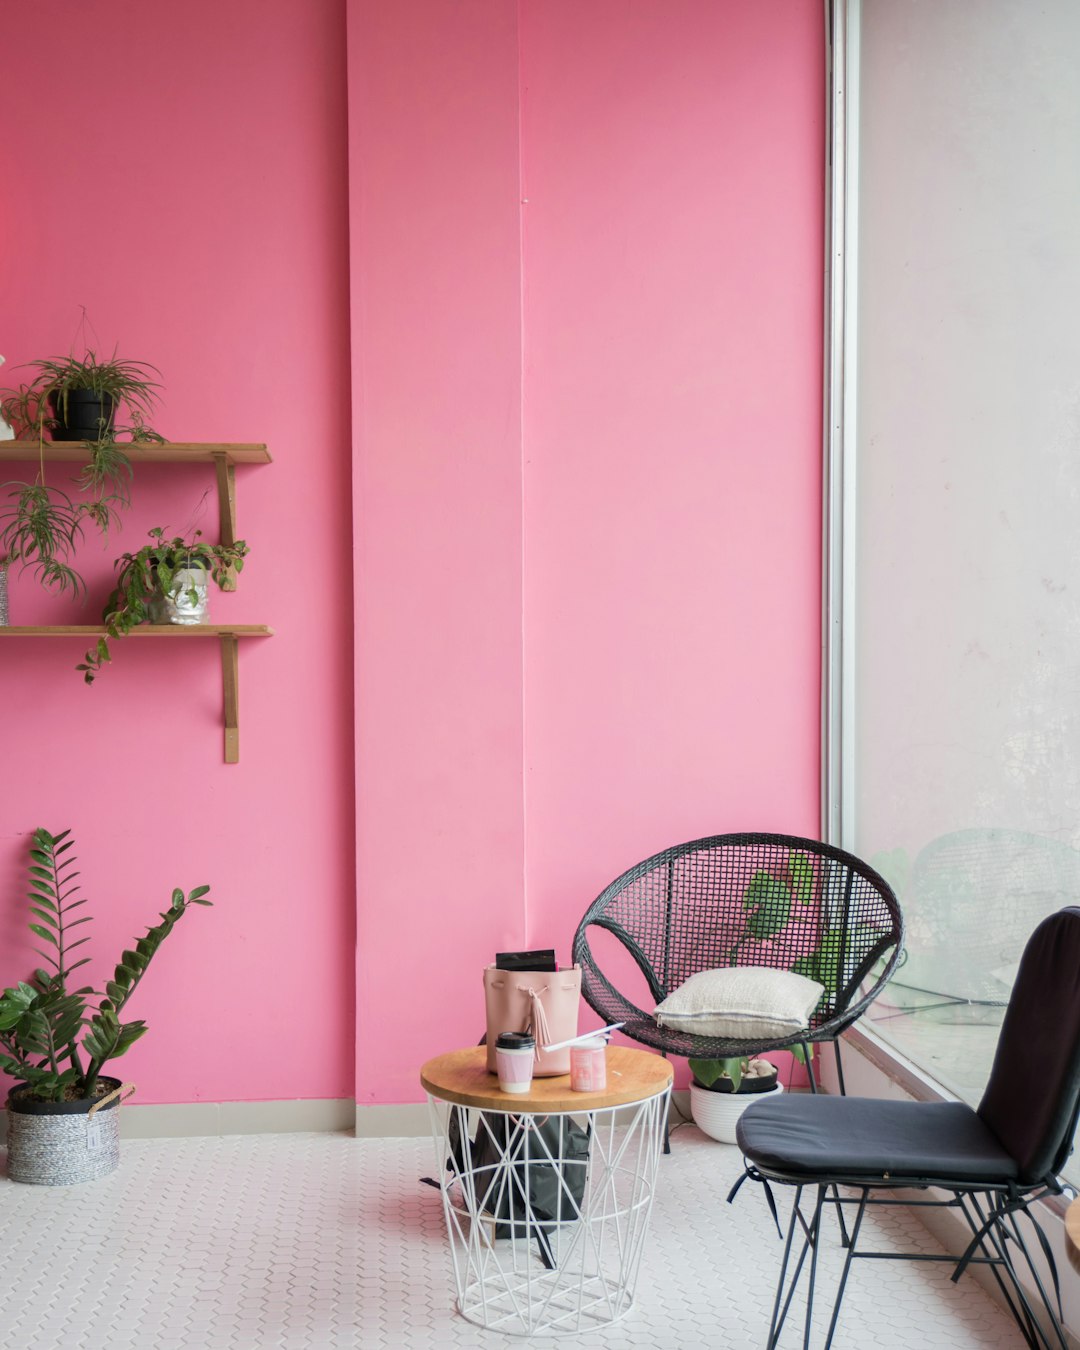 Pink Home Decor: Infuse Personality & Style with Versatile Pink Tones ...